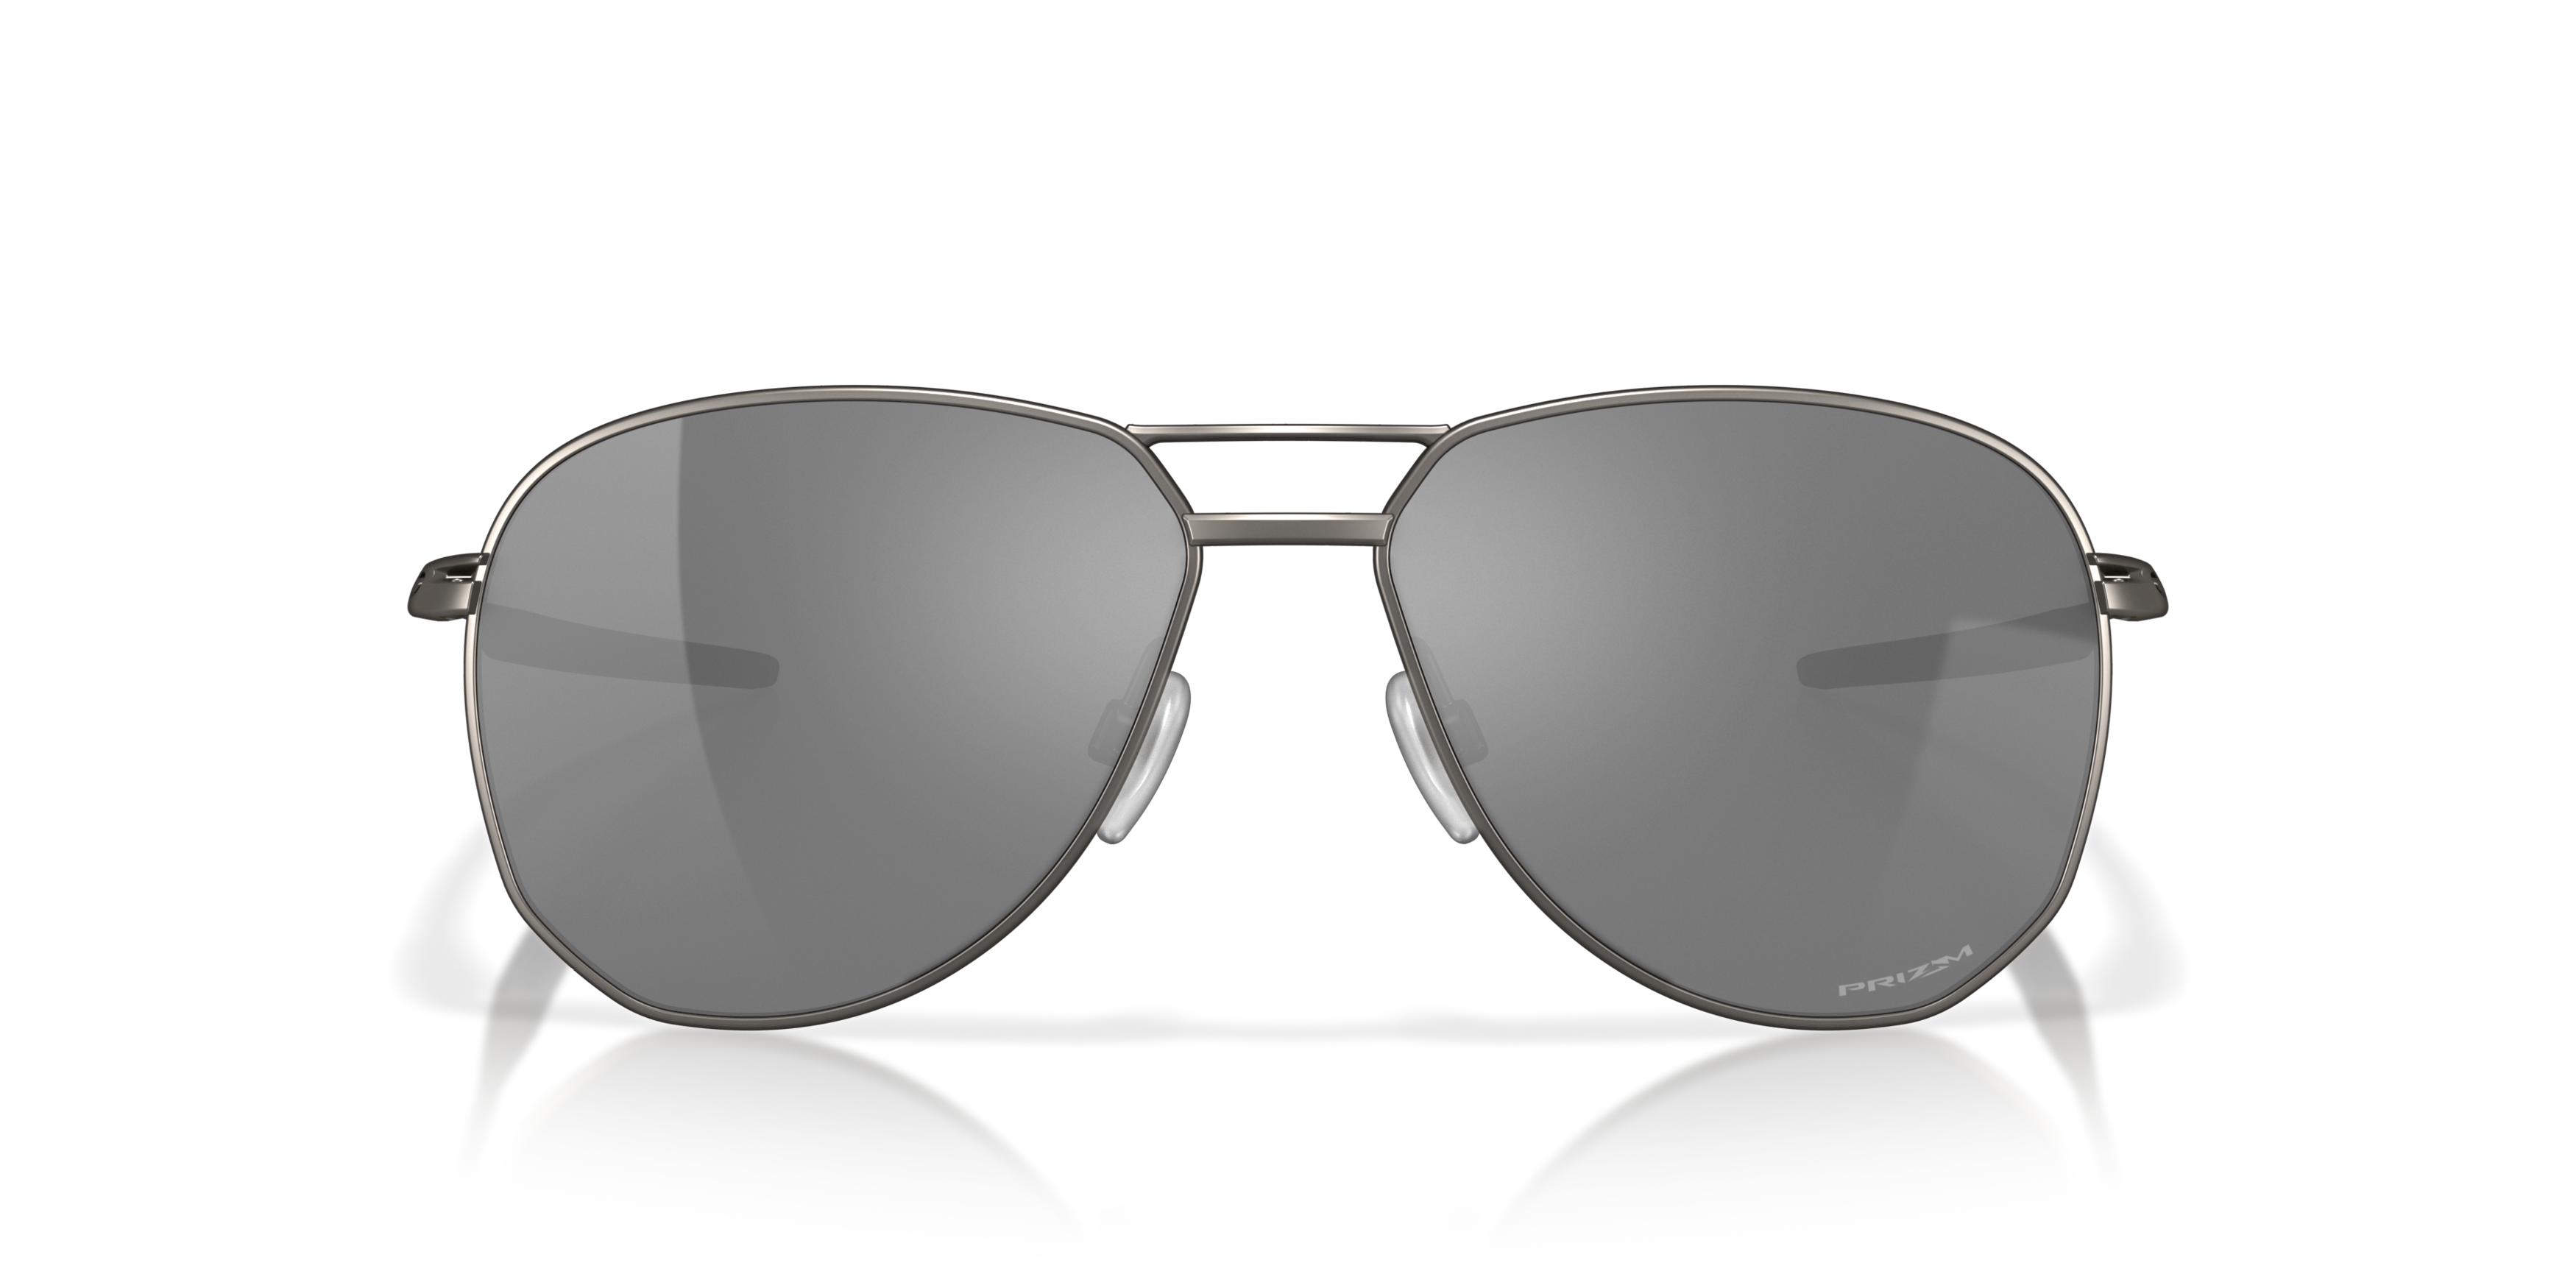 [products.image.front] Oakley Contrail OO4147 0257